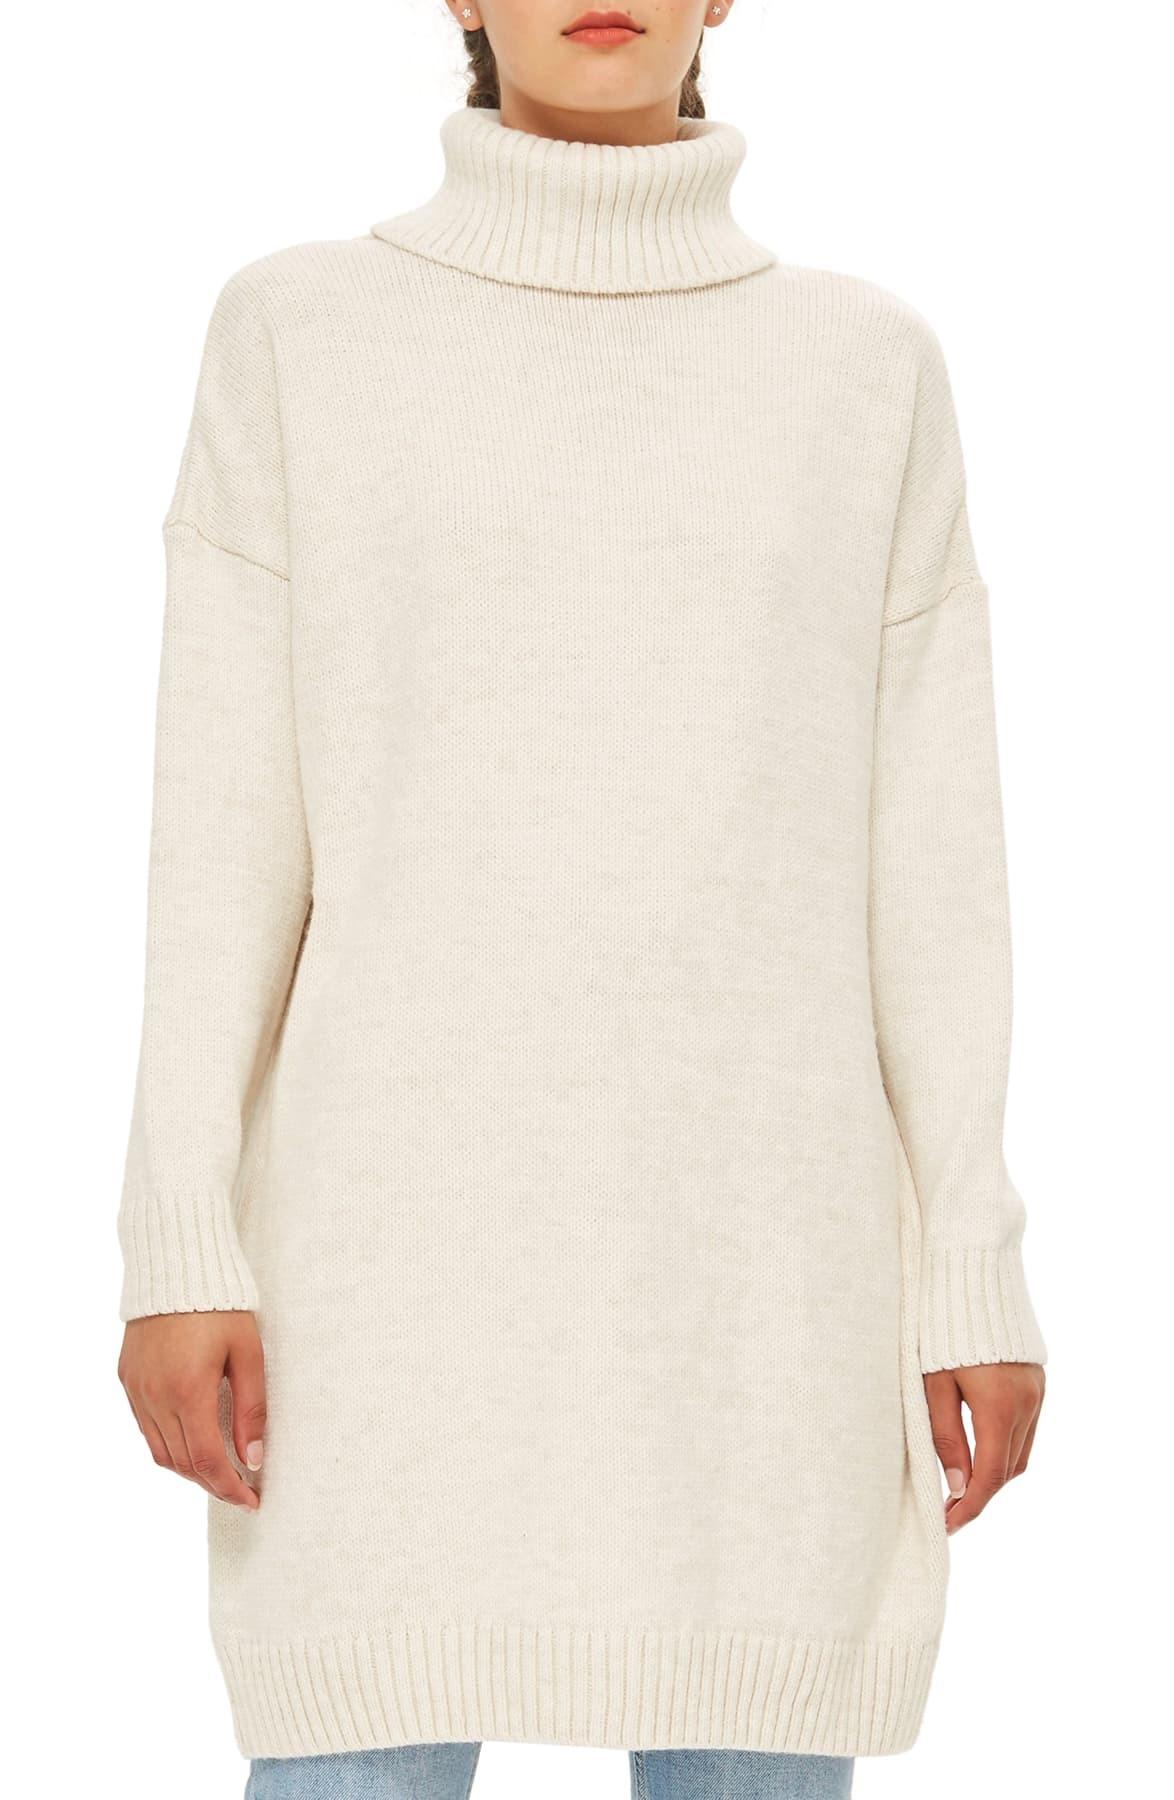 TOPSHOP Turtleneck Sweater Dress in Oatmeal (Natural) | Lyst